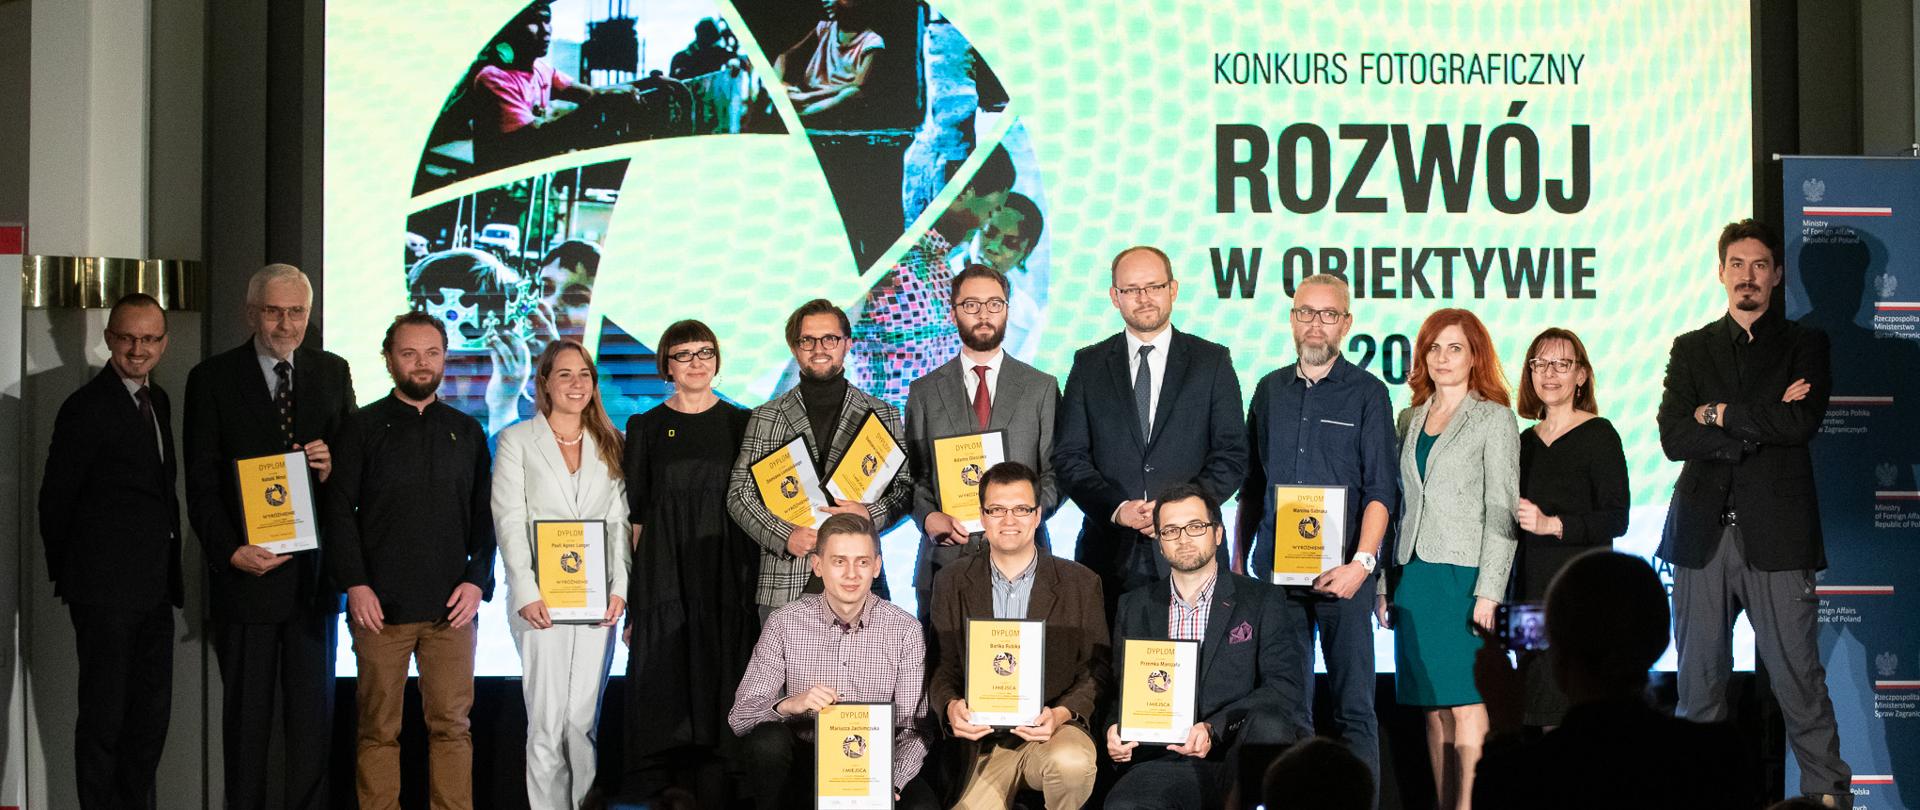 Award ceremony of the “Lens on Development 2019” contest attended by Deputy Foreign Minister Marcin Przydacz